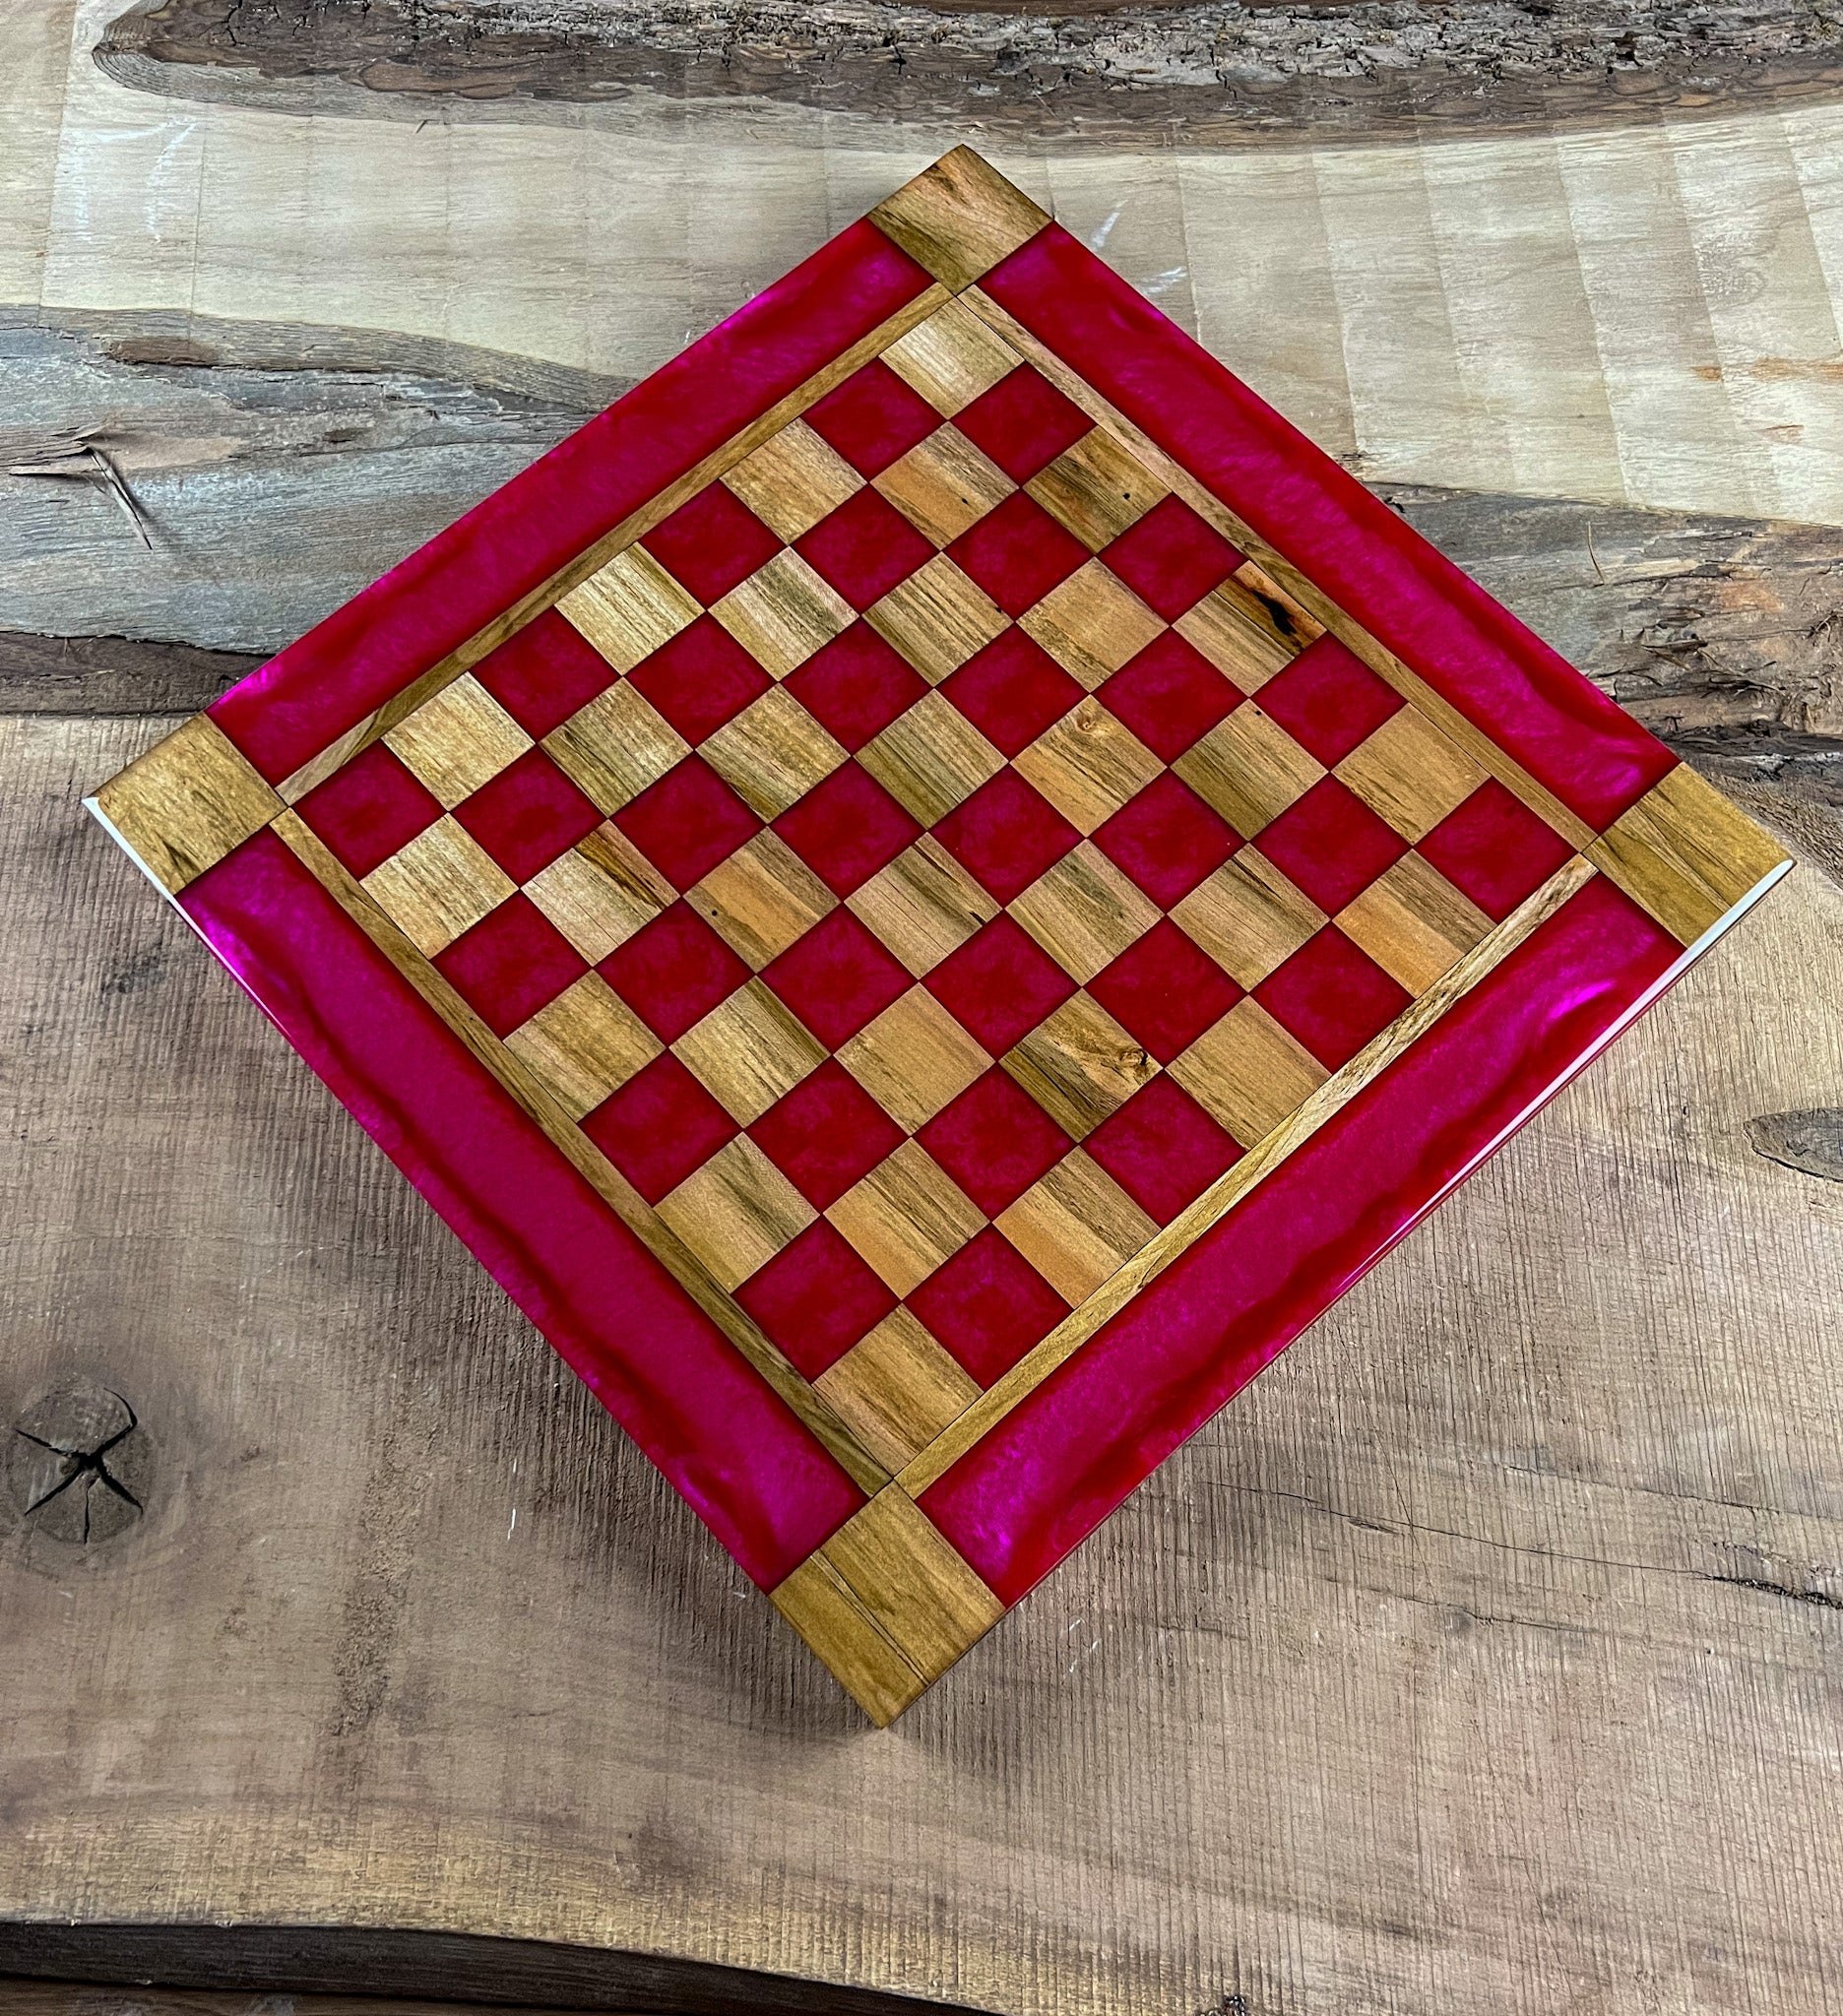 Raging Pink Maple Wood Chess Board (With Border)